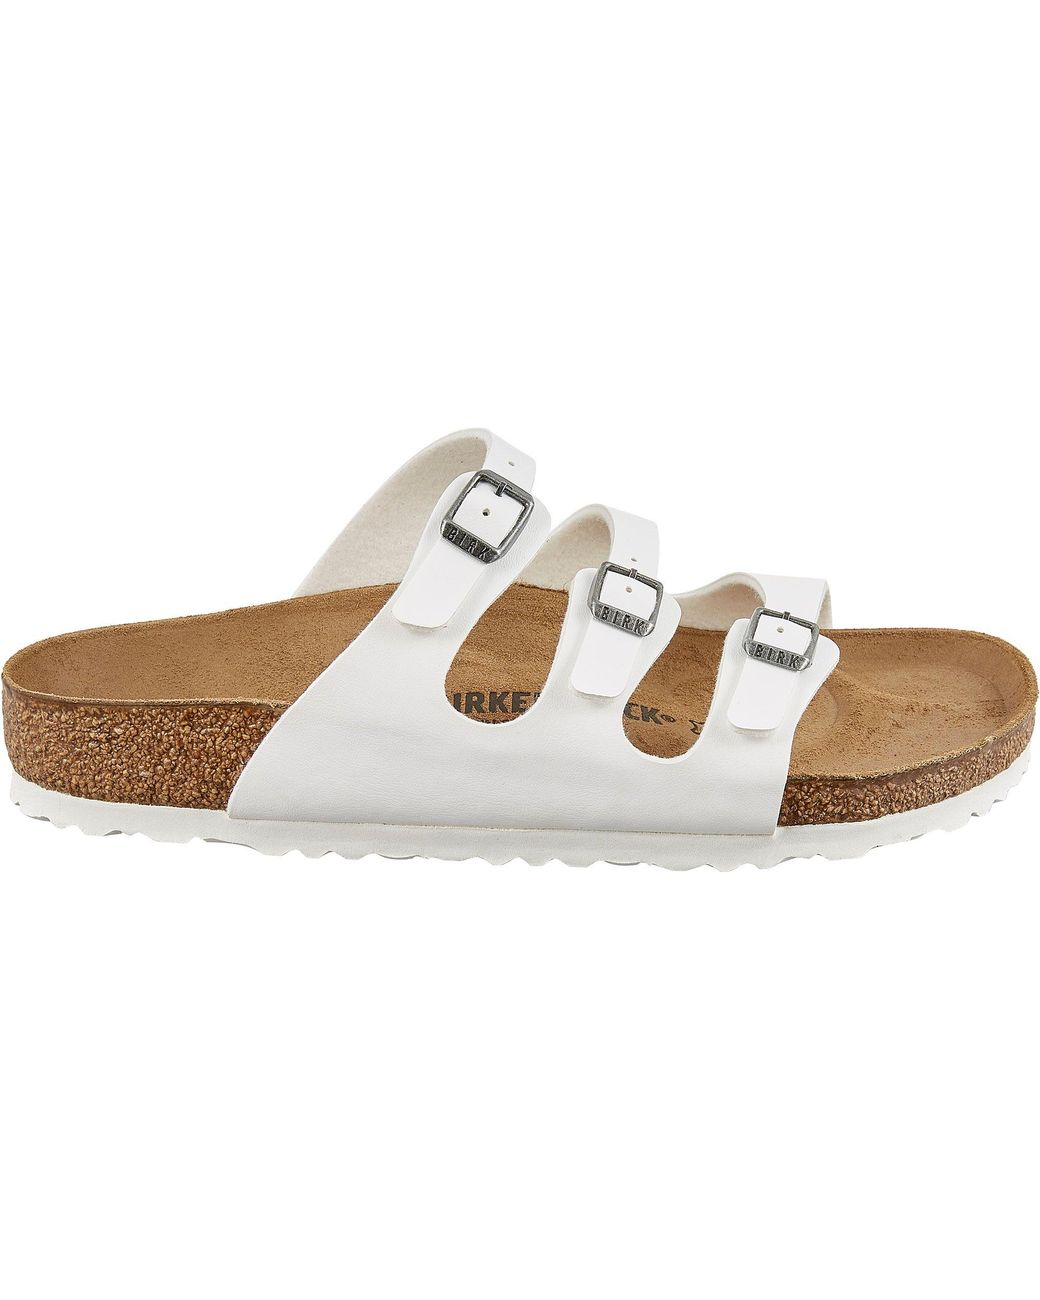 Birkenstock Synthetic Florida Sandals in White - Lyst